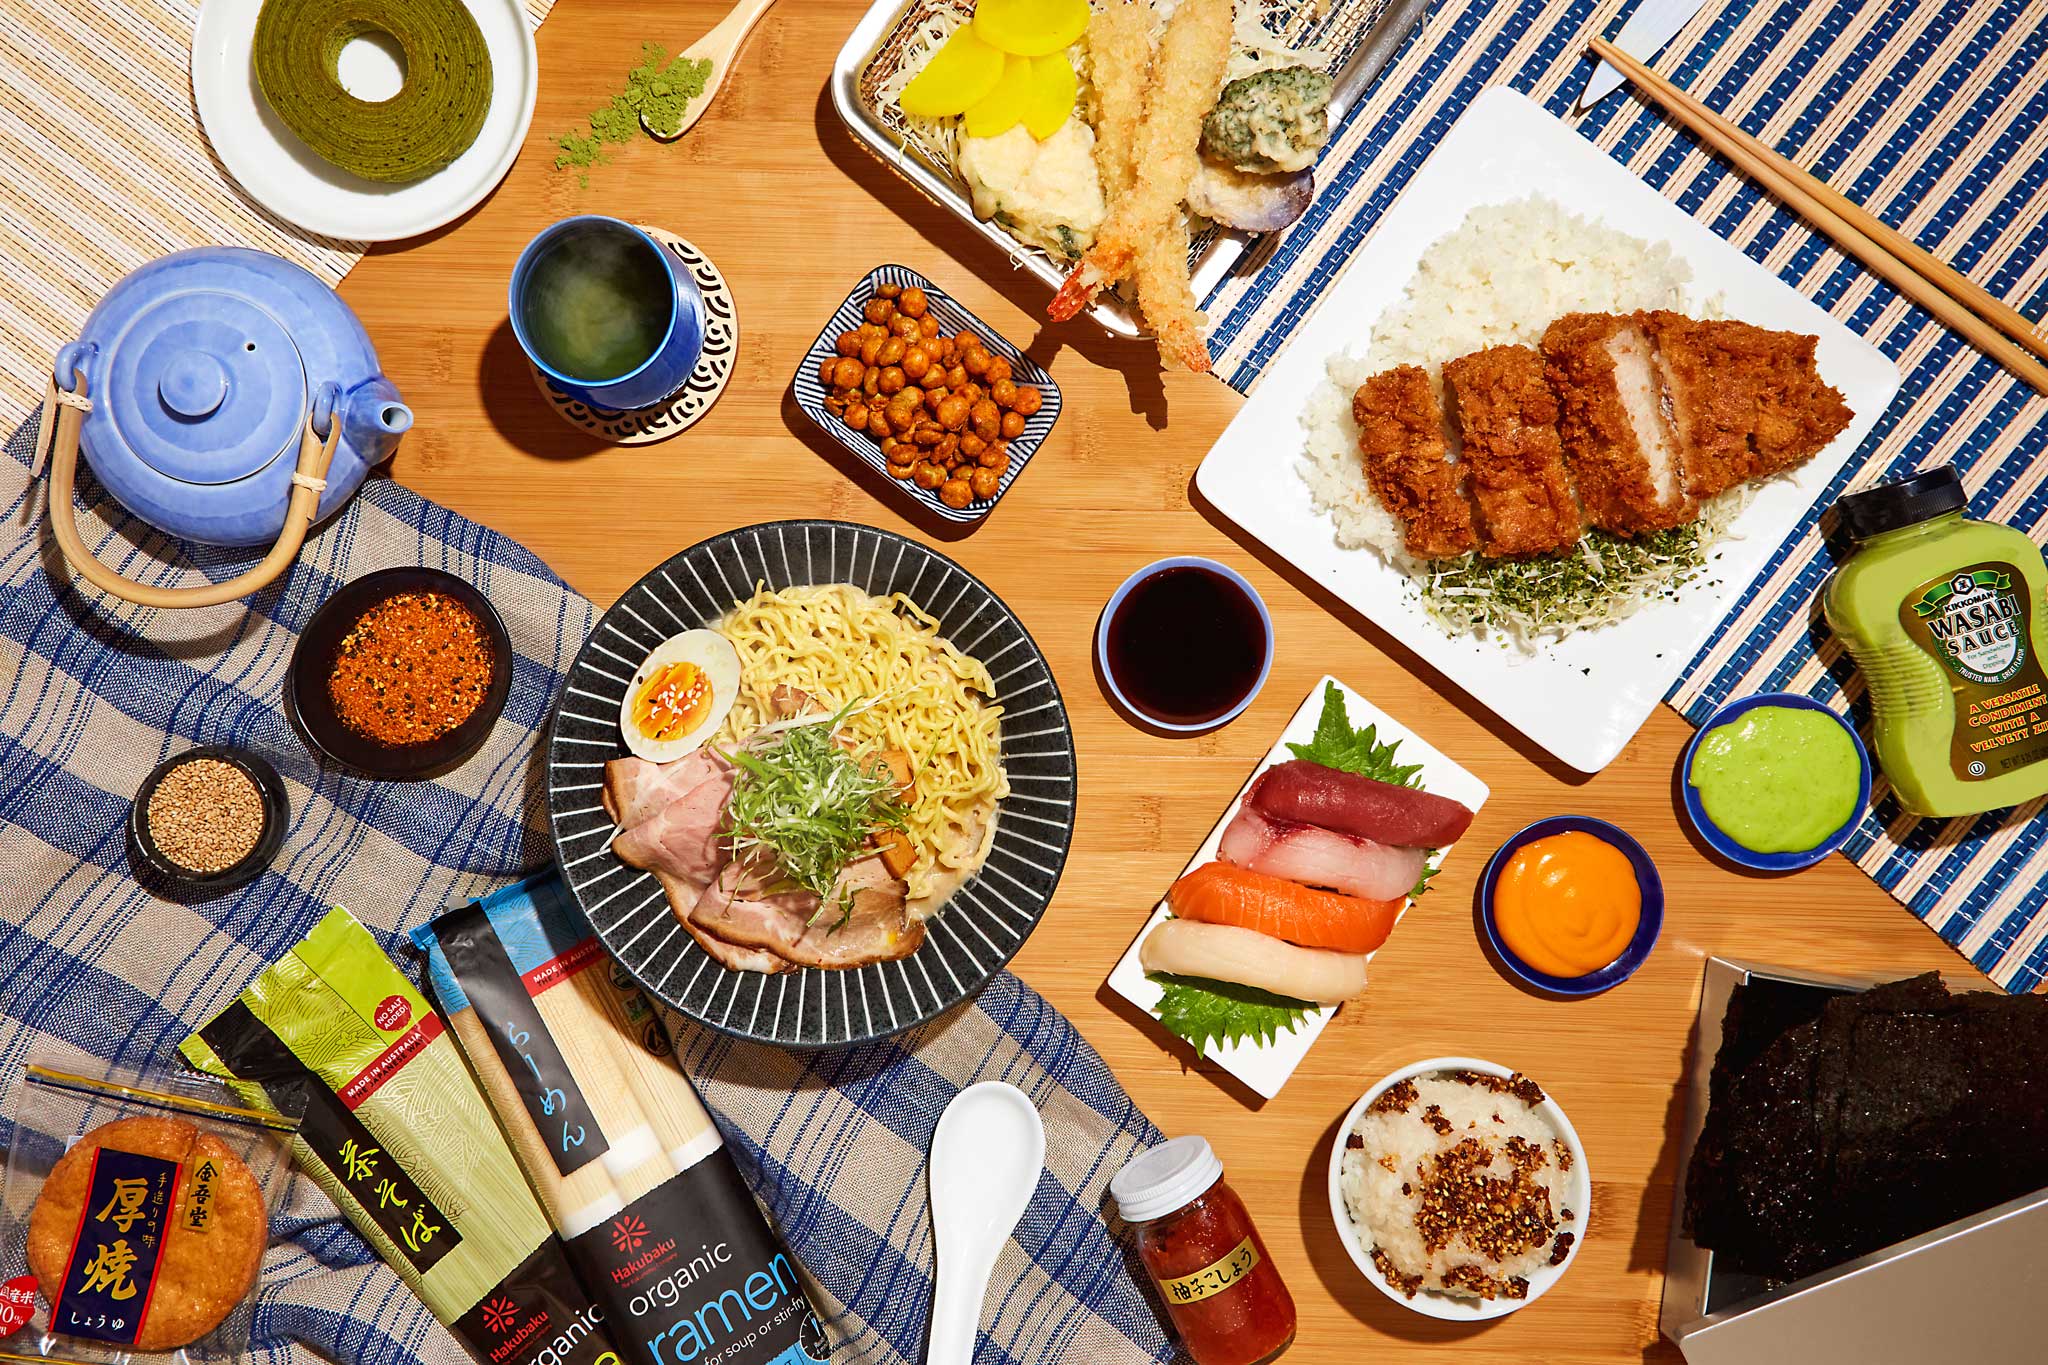 Bokksu bags $22M Series A at a $100M valuation to deliver traditional Asian groceries to your home 